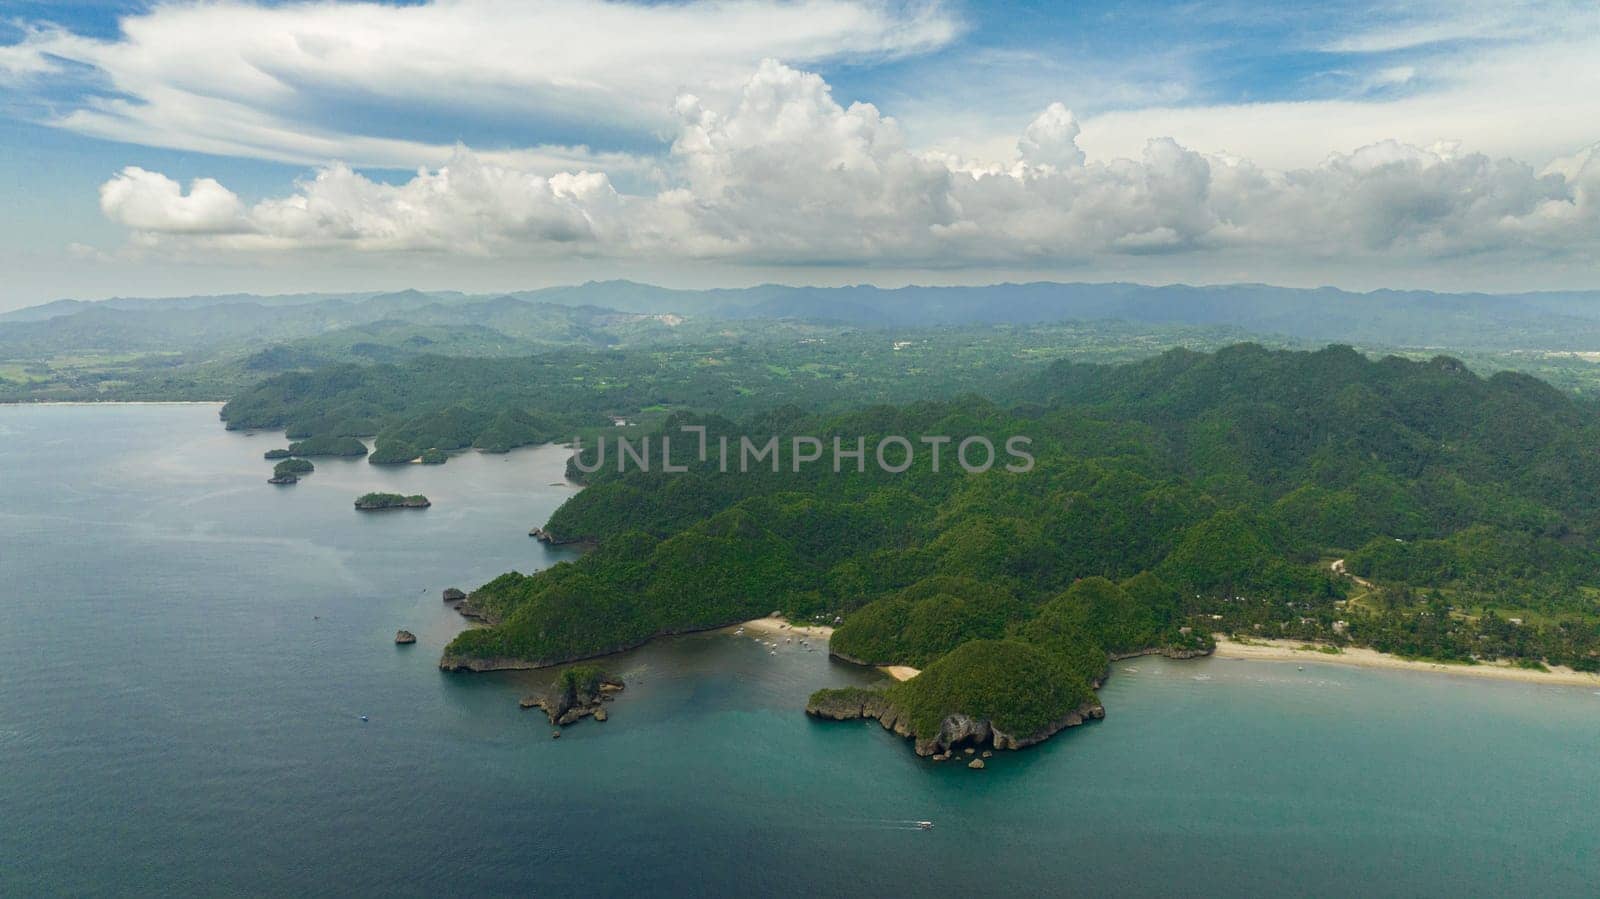 Aerial view of coast of the island with tropical vegetation and the beach. Negros, Philippines.